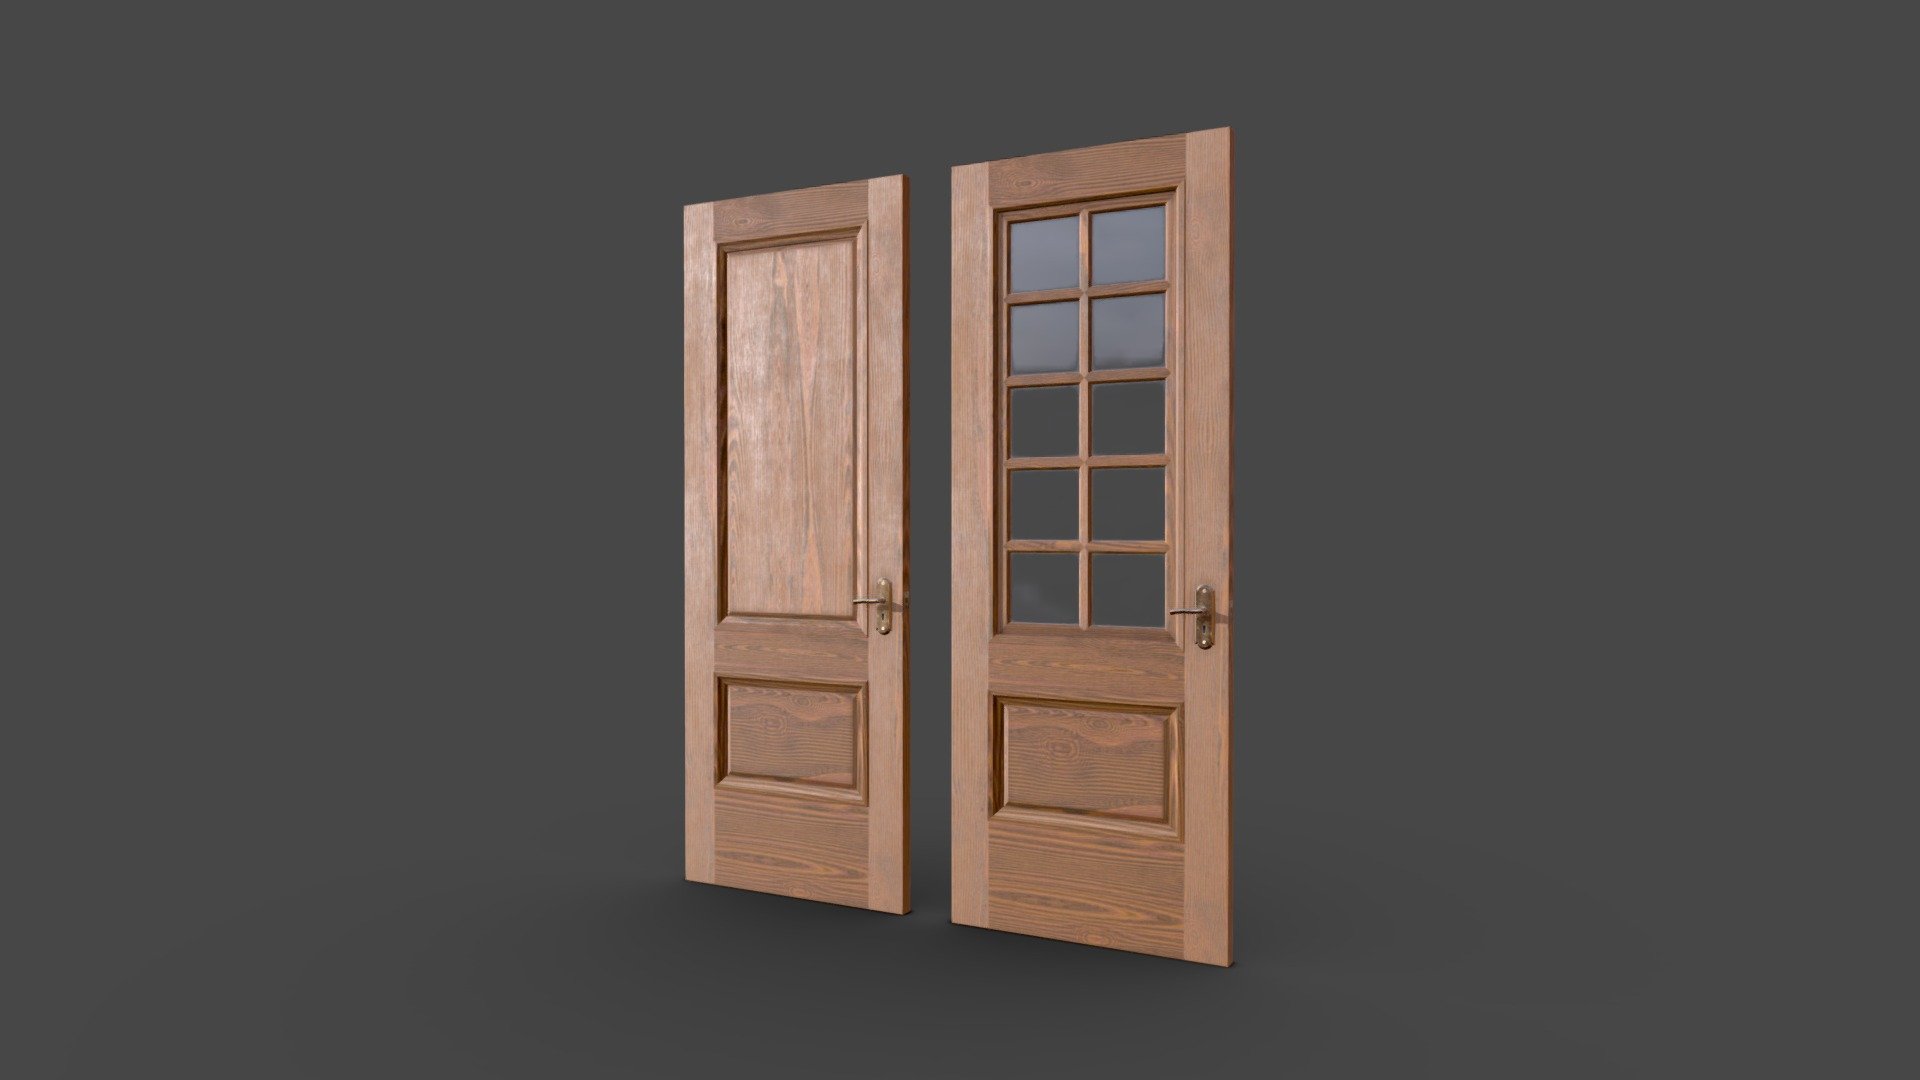 Rustic Wooden Doors. External and internal doors (One with glass windows and the other without). Optimised and ready for game or render engines.

Low poly and high poly model varients included.

PBR texture maps included (.jpg):

Basecolor

Metallic

Normal

Roughness

Opacity

Unity maps included (.png):

AlbedoTransparency

MetallicSmoothness

Normal

Opacity

Texture Res (4096 x 4096 px) - Rustic Wooden Doors - Game Ready Low-poly - Buy Royalty Free 3D model by Sean Byrne (@seanbyrne) 3d model